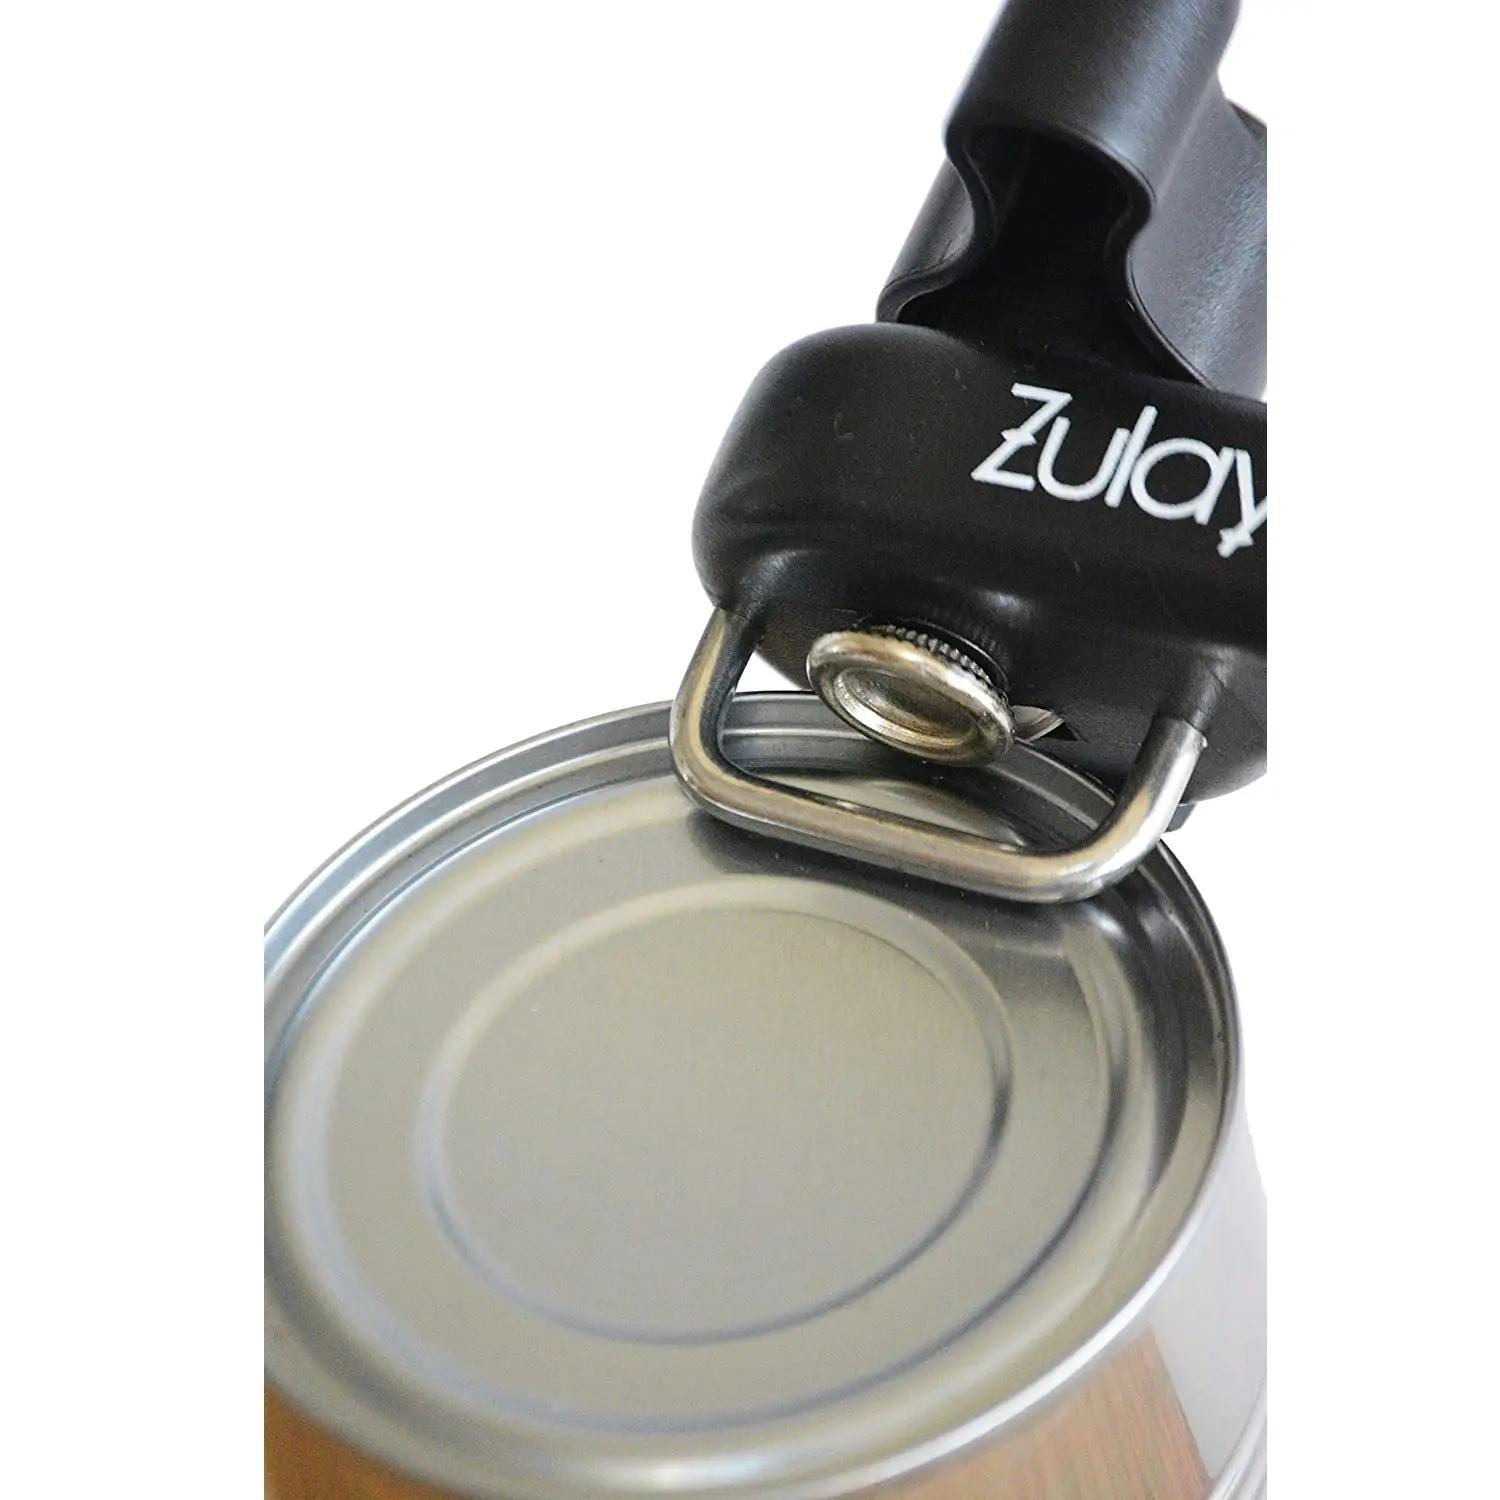 Zulay Smooth Edge Can Opener With Stainless Steel Blades